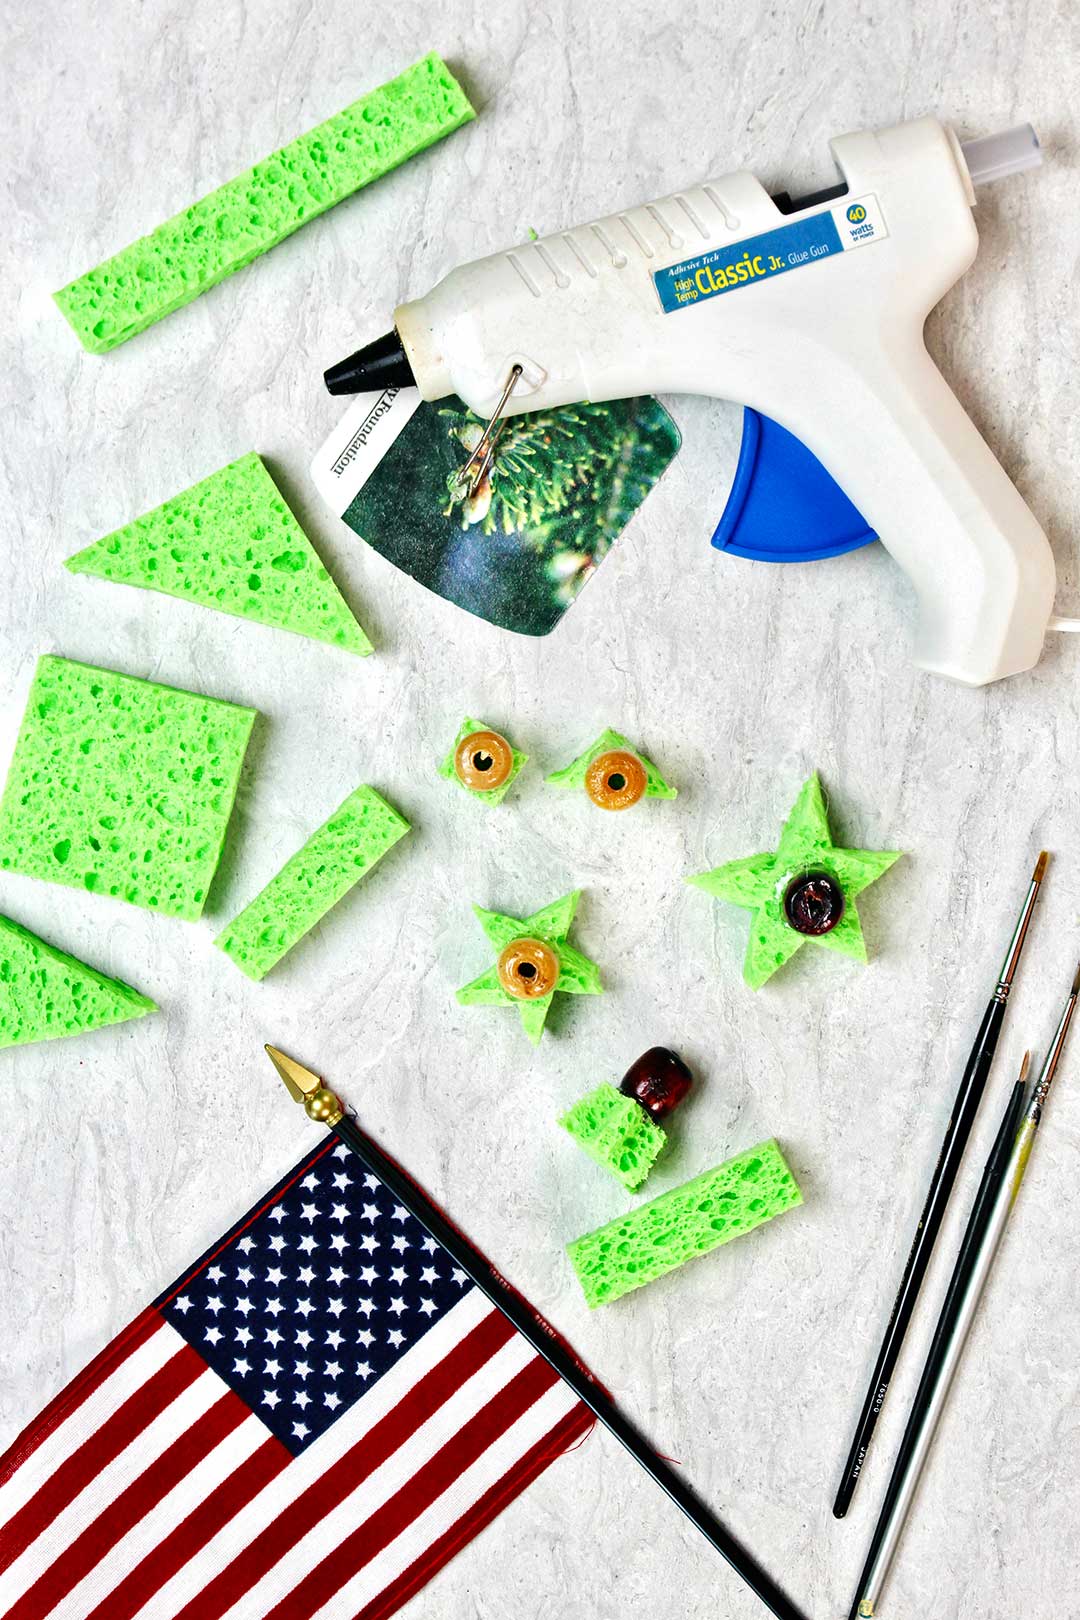 Flat lay of cut sponge pieces, paint brushes, American flag and hot glue gun. Wooden beads are glued to the sponge pieces.